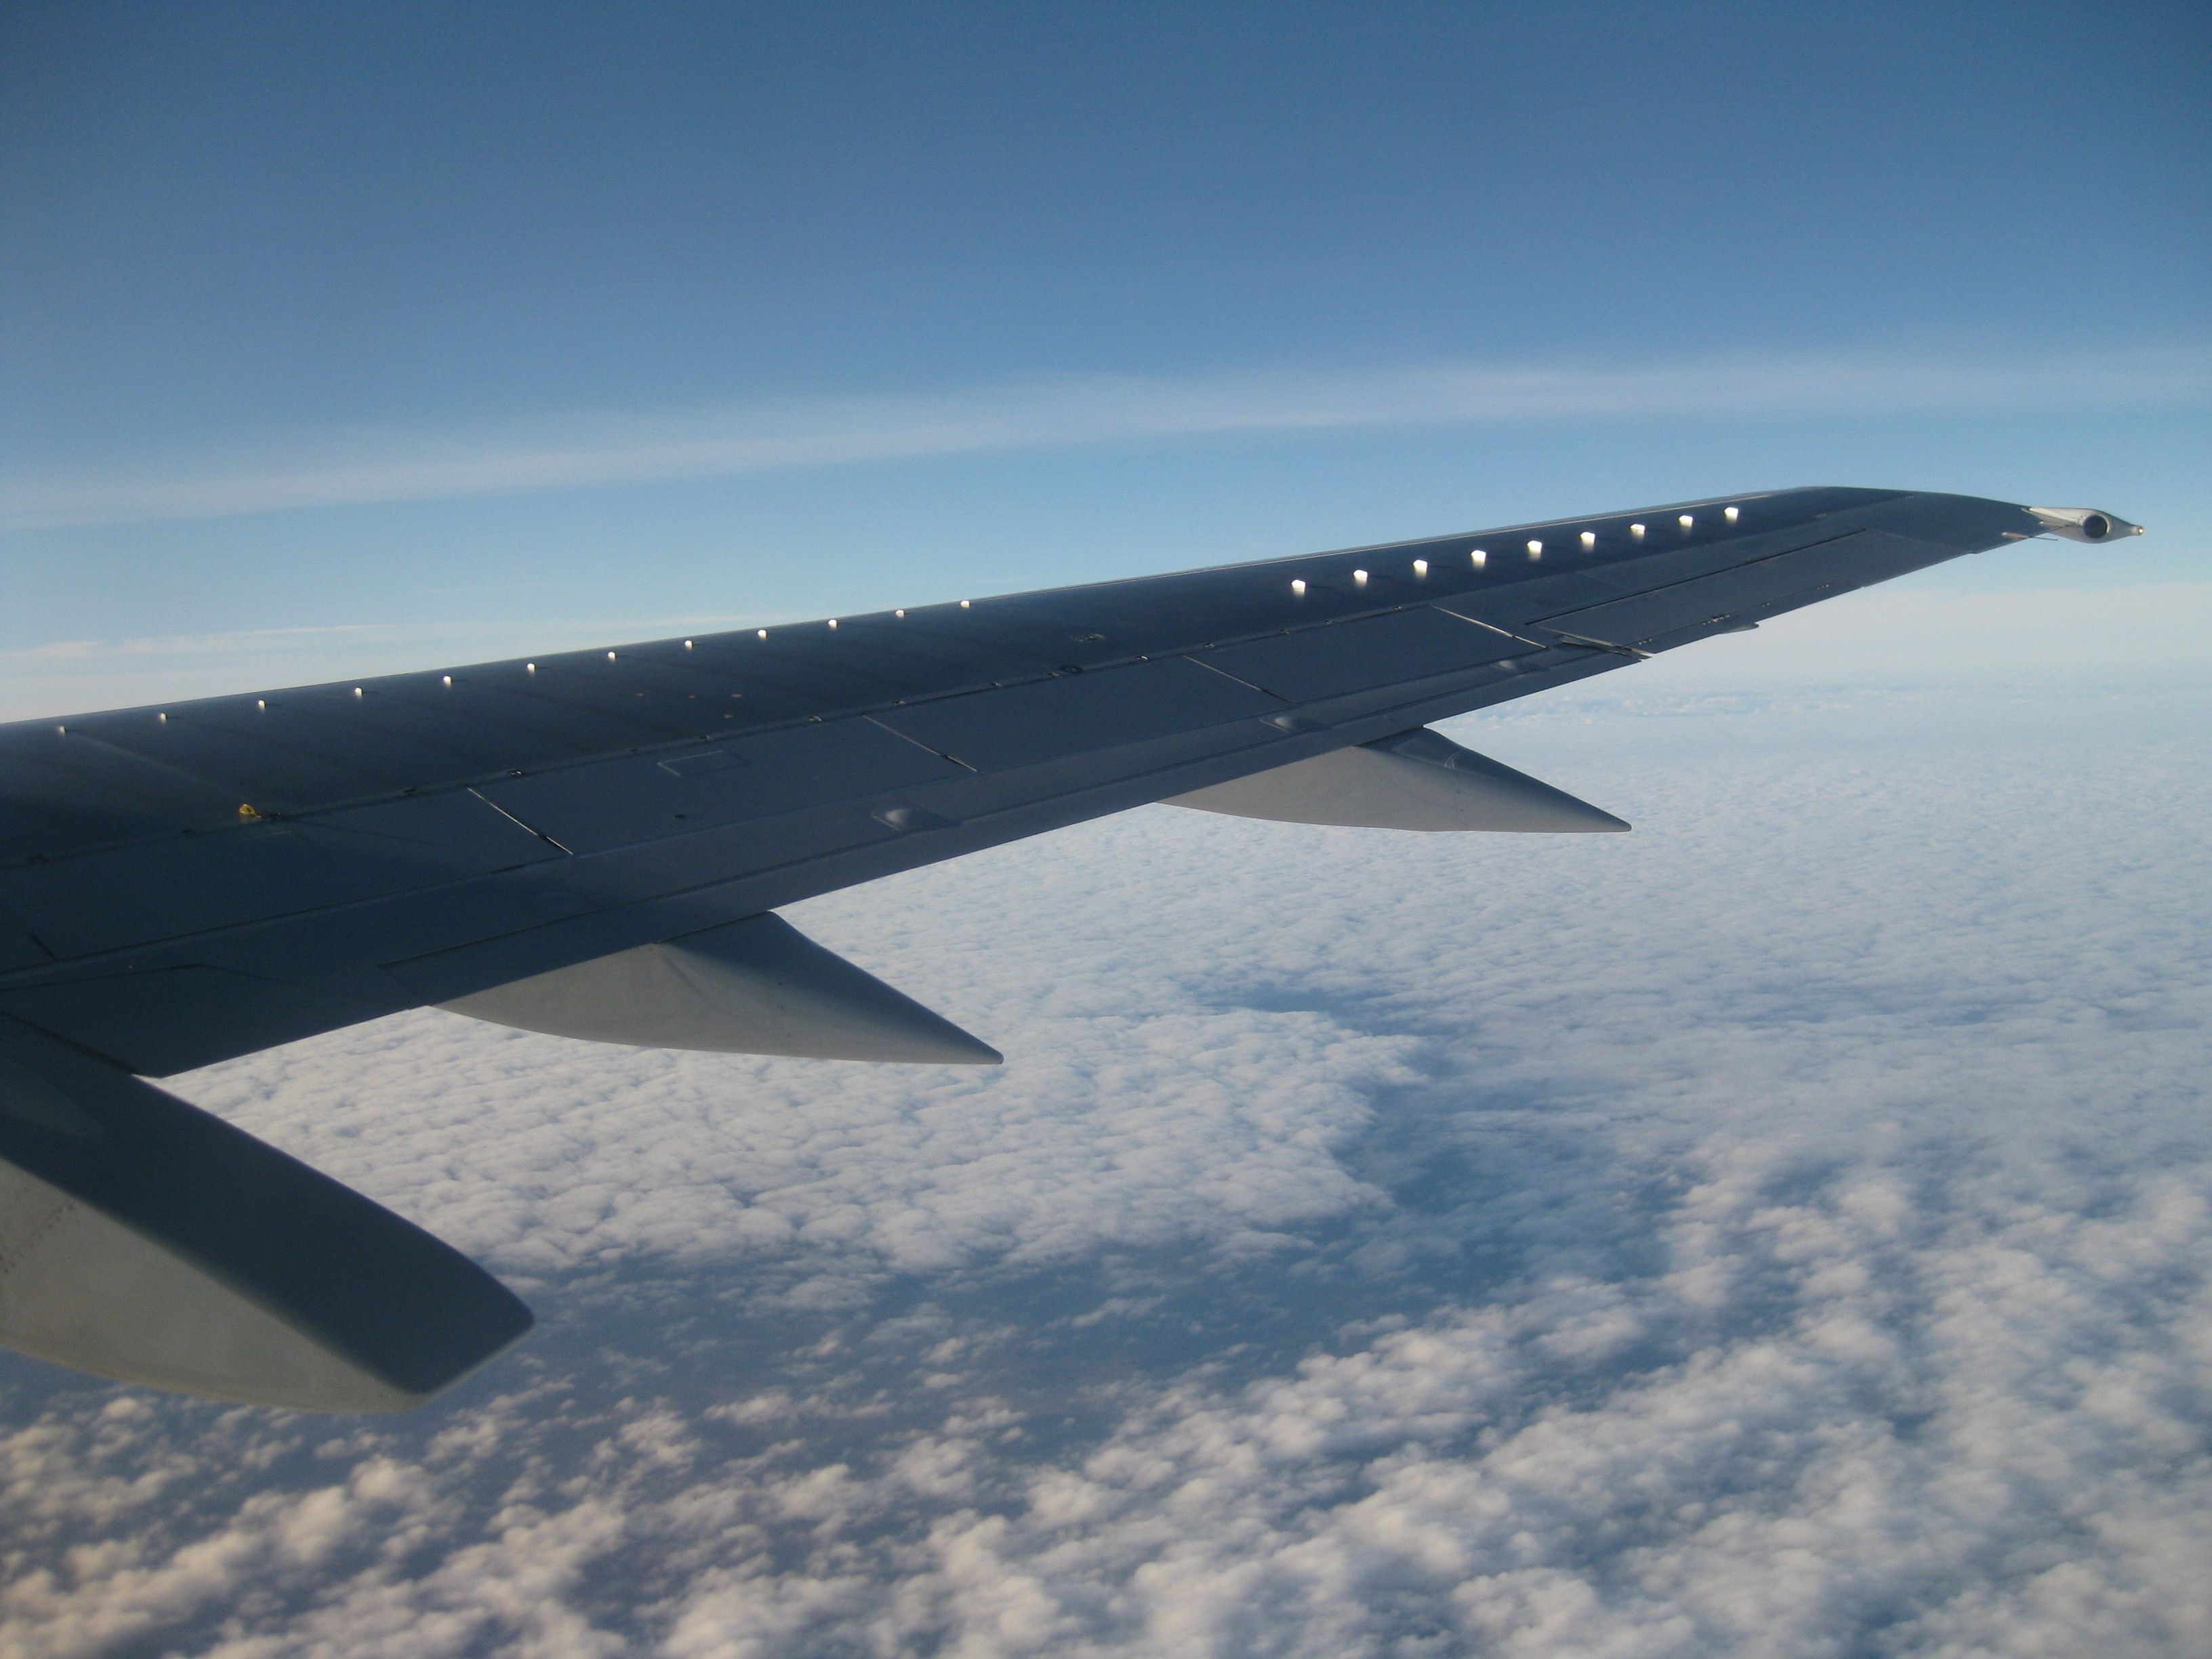 Plane piece and sky, Air, Aircraft, Airplane, Airplane wing, HQ Photo